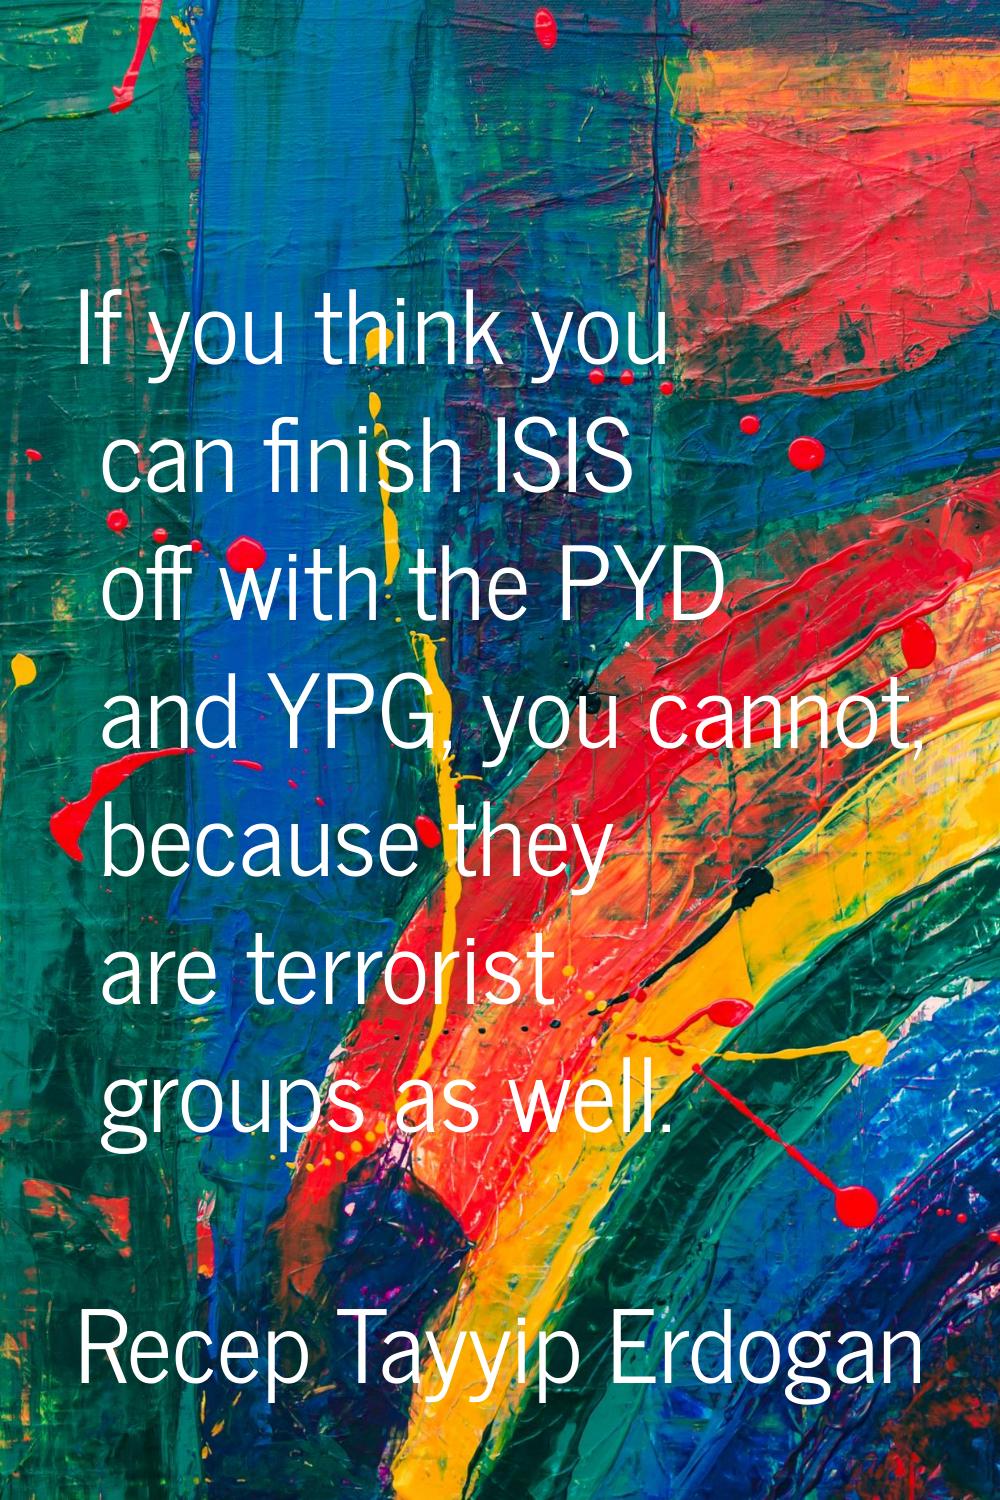 If you think you can finish ISIS off with the PYD and YPG, you cannot, because they are terrorist g